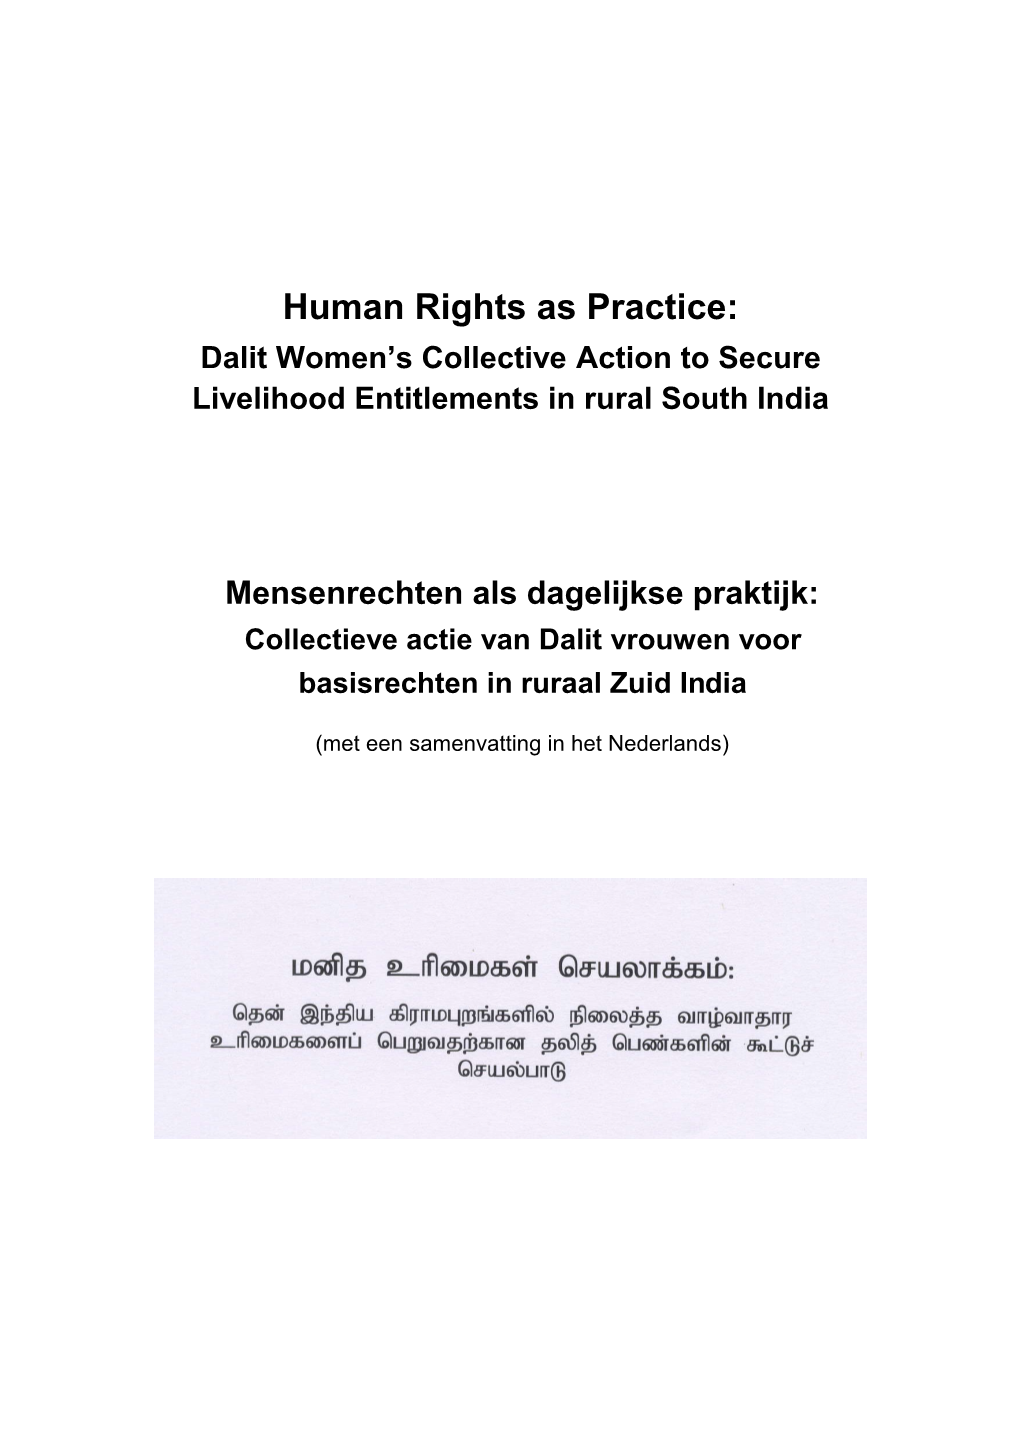 Human Rights As Practice: Dalit Women’S Collective Action to Secure Livelihood Entitlements in Rural South India